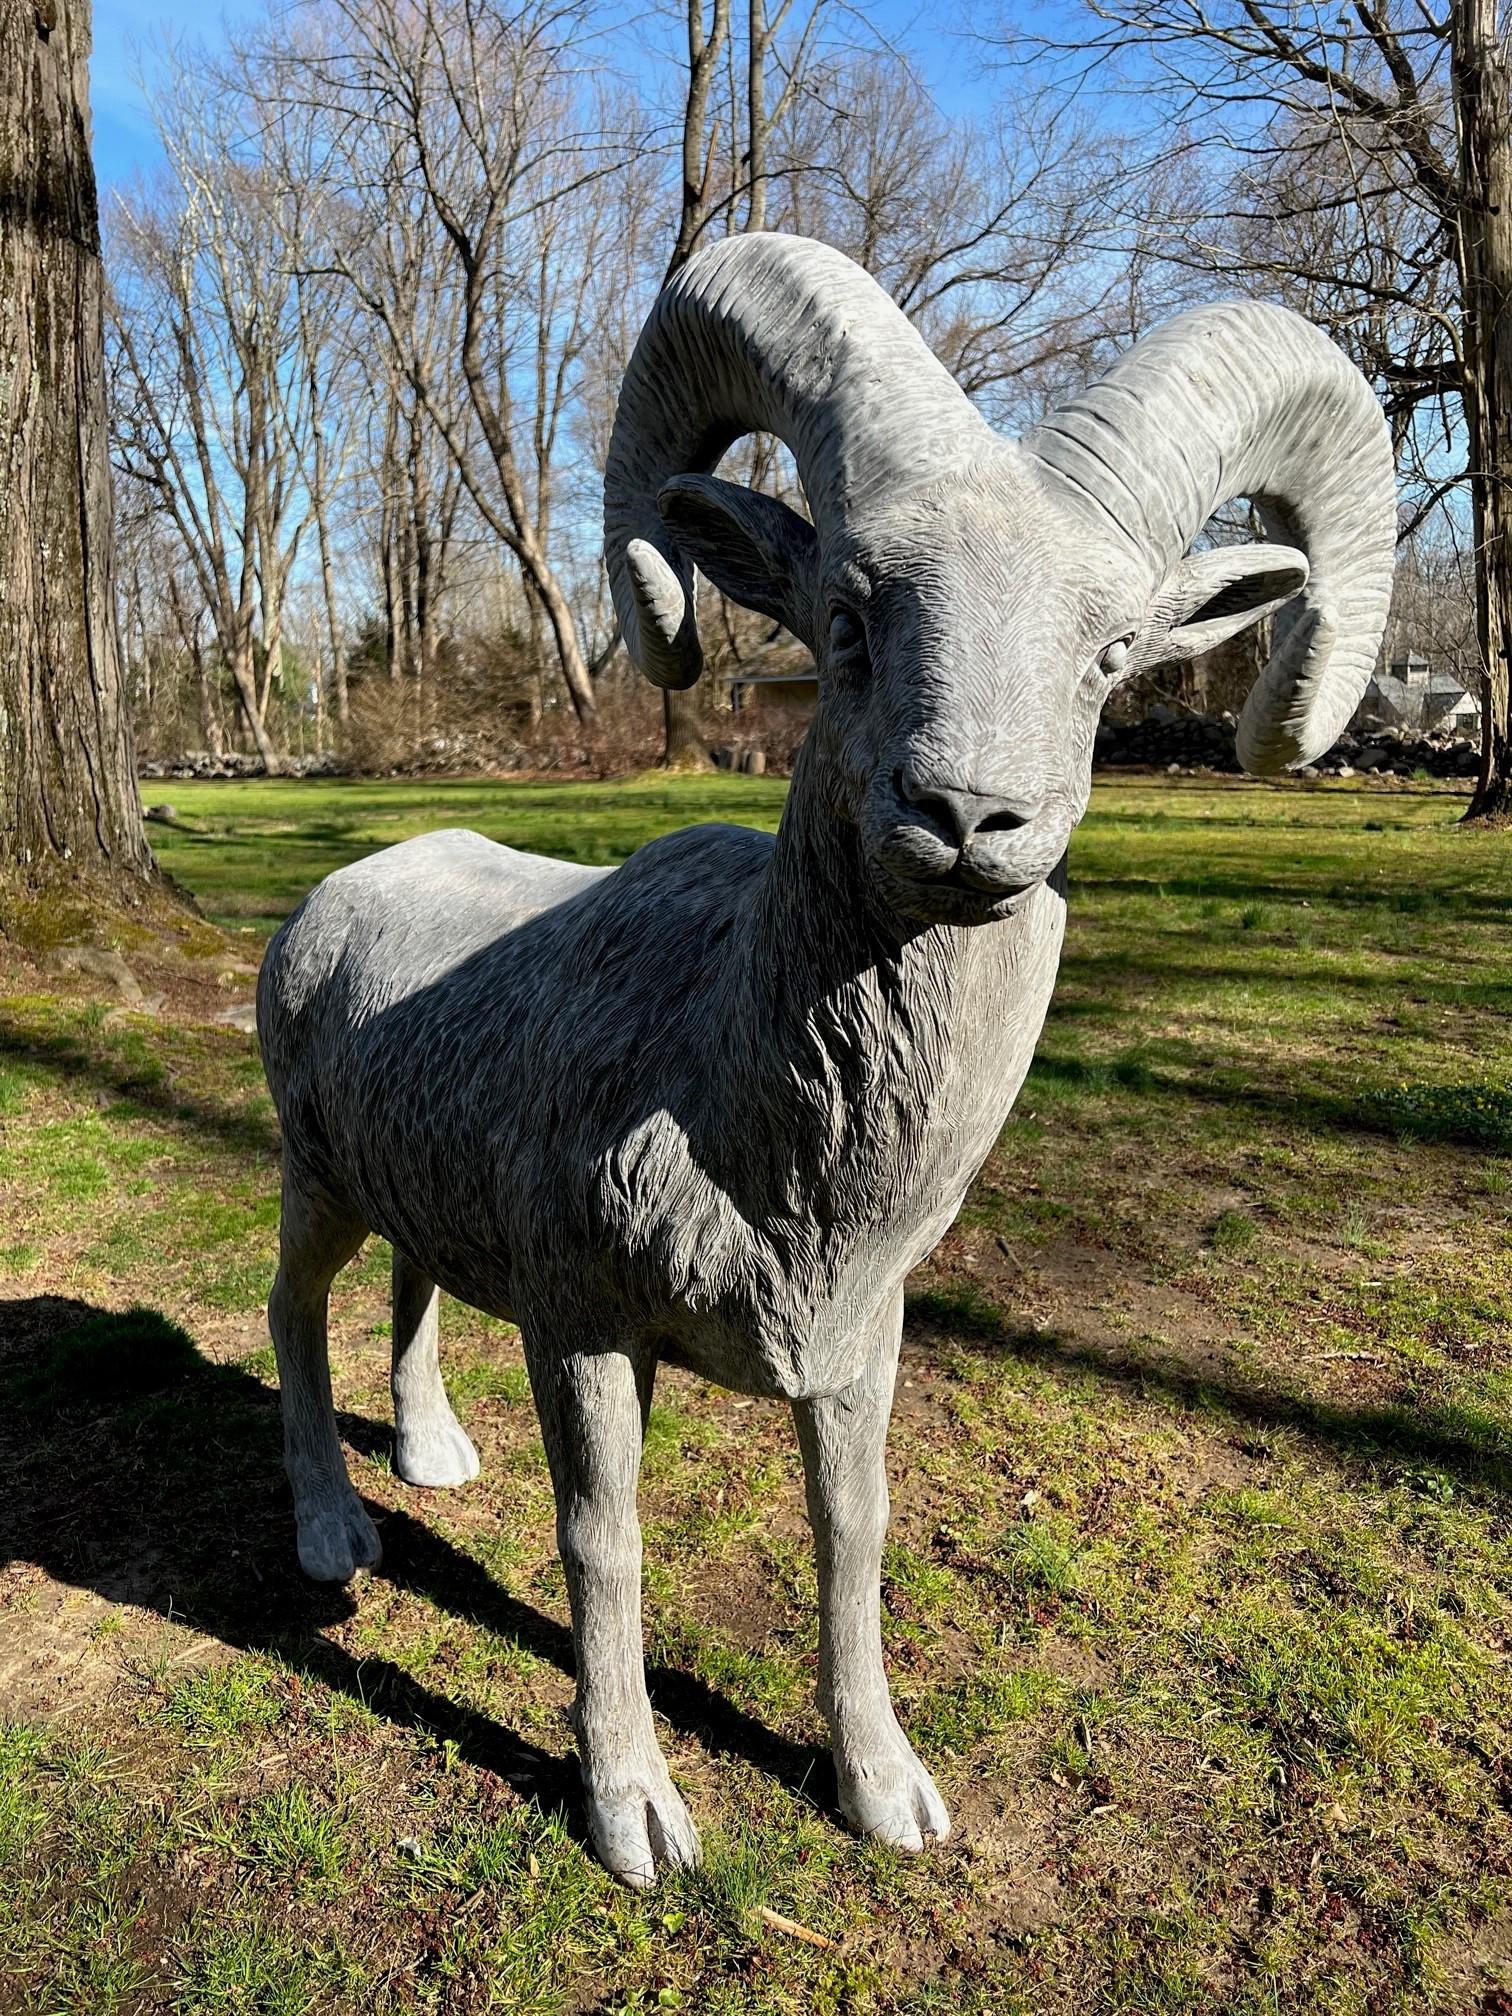 Life size fiberglass Ram is made of a very strong fiberglass which will withstand the elements. This Ram is fantastic and a perfect addition to any garden or yard. Also would be great as a school mascot 
GO RAMS.